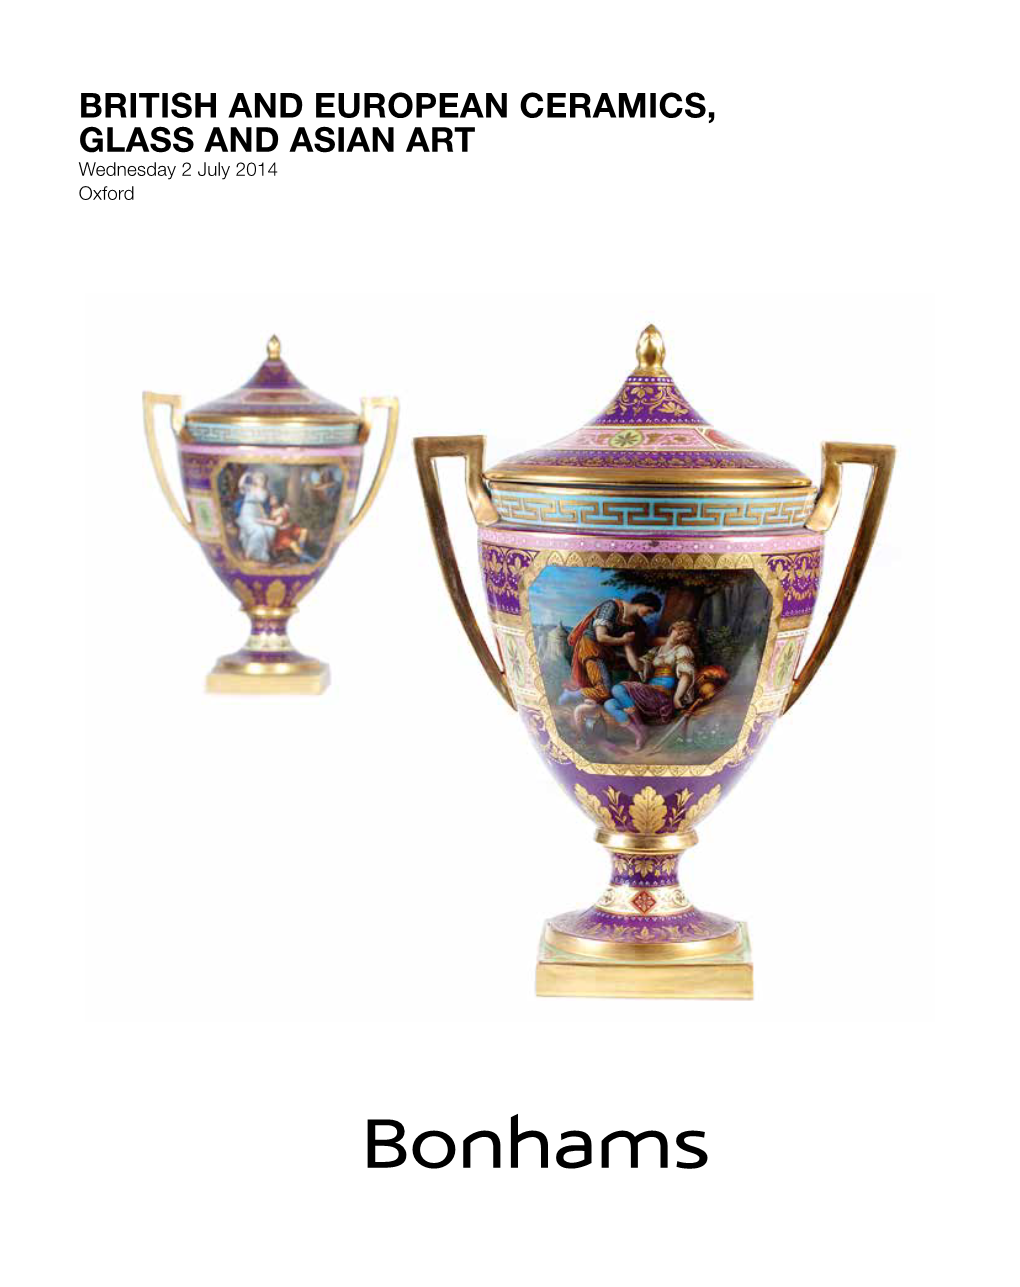 British and European Ceramics, Glass and Asian Art Wednesday 2 July 2014 at 11.00 Oxford